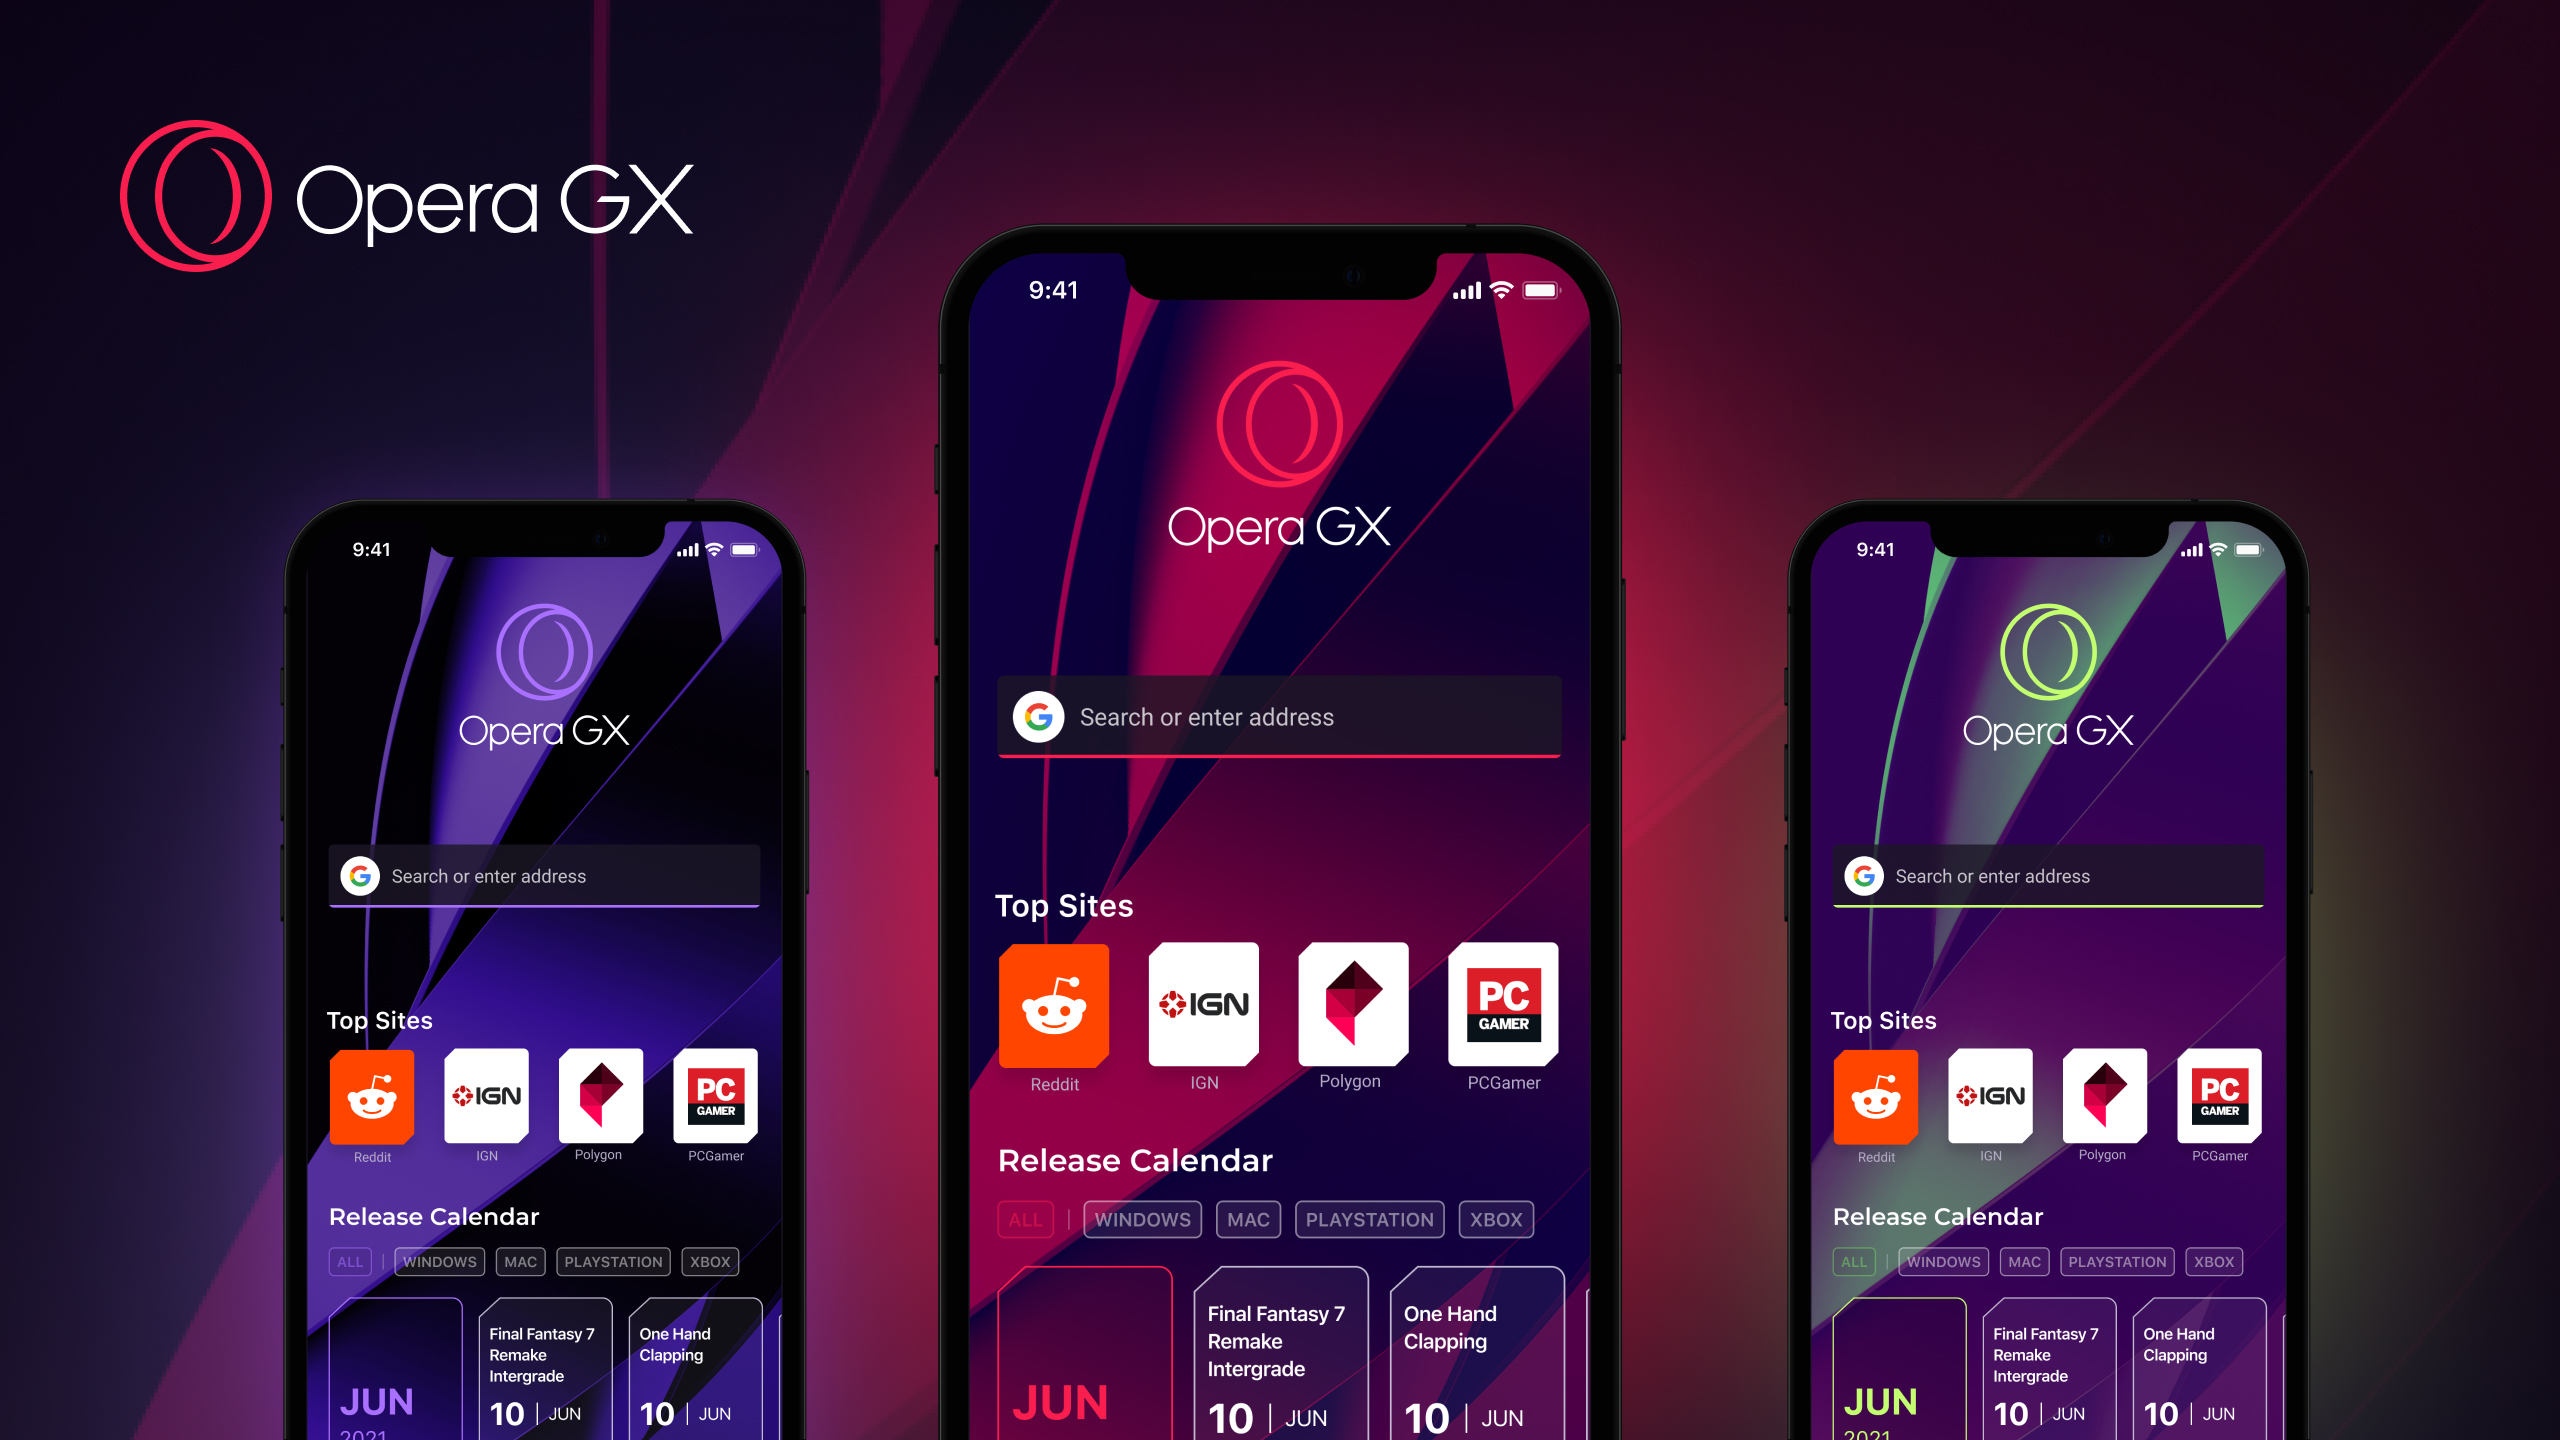 iF Design - Opera GX Mobile world's first mobile browser for gamers